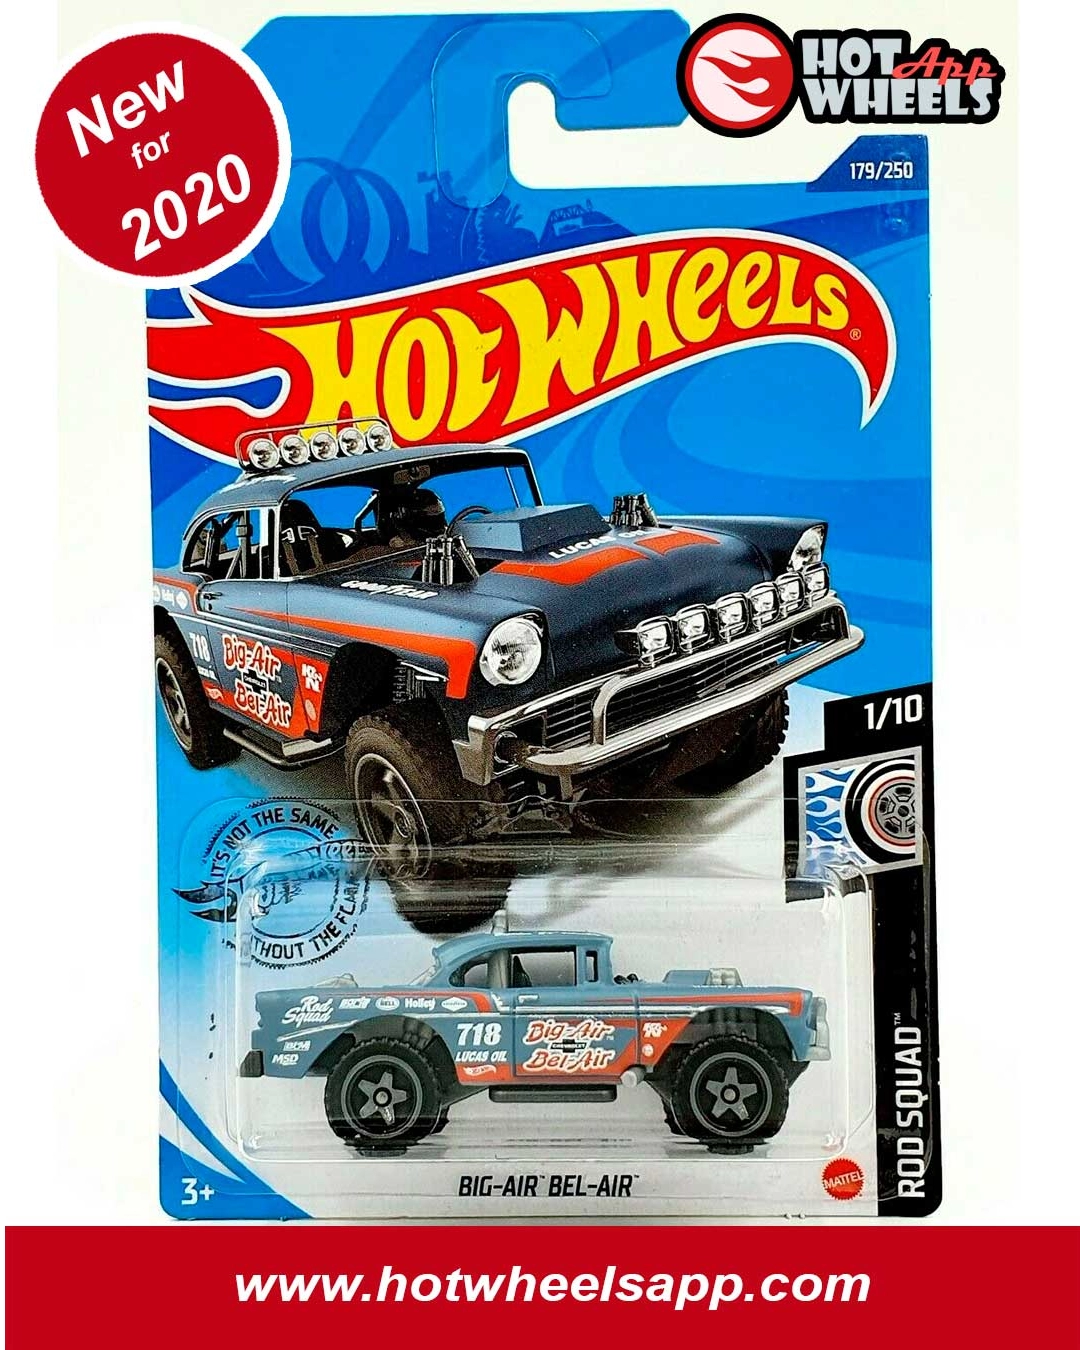 Details about   ` 2020 Hot Wheels 179/250 Chevy Big-Air Bel-Air WHITE 1/10 ROD SQUAD ~ Box Ships 